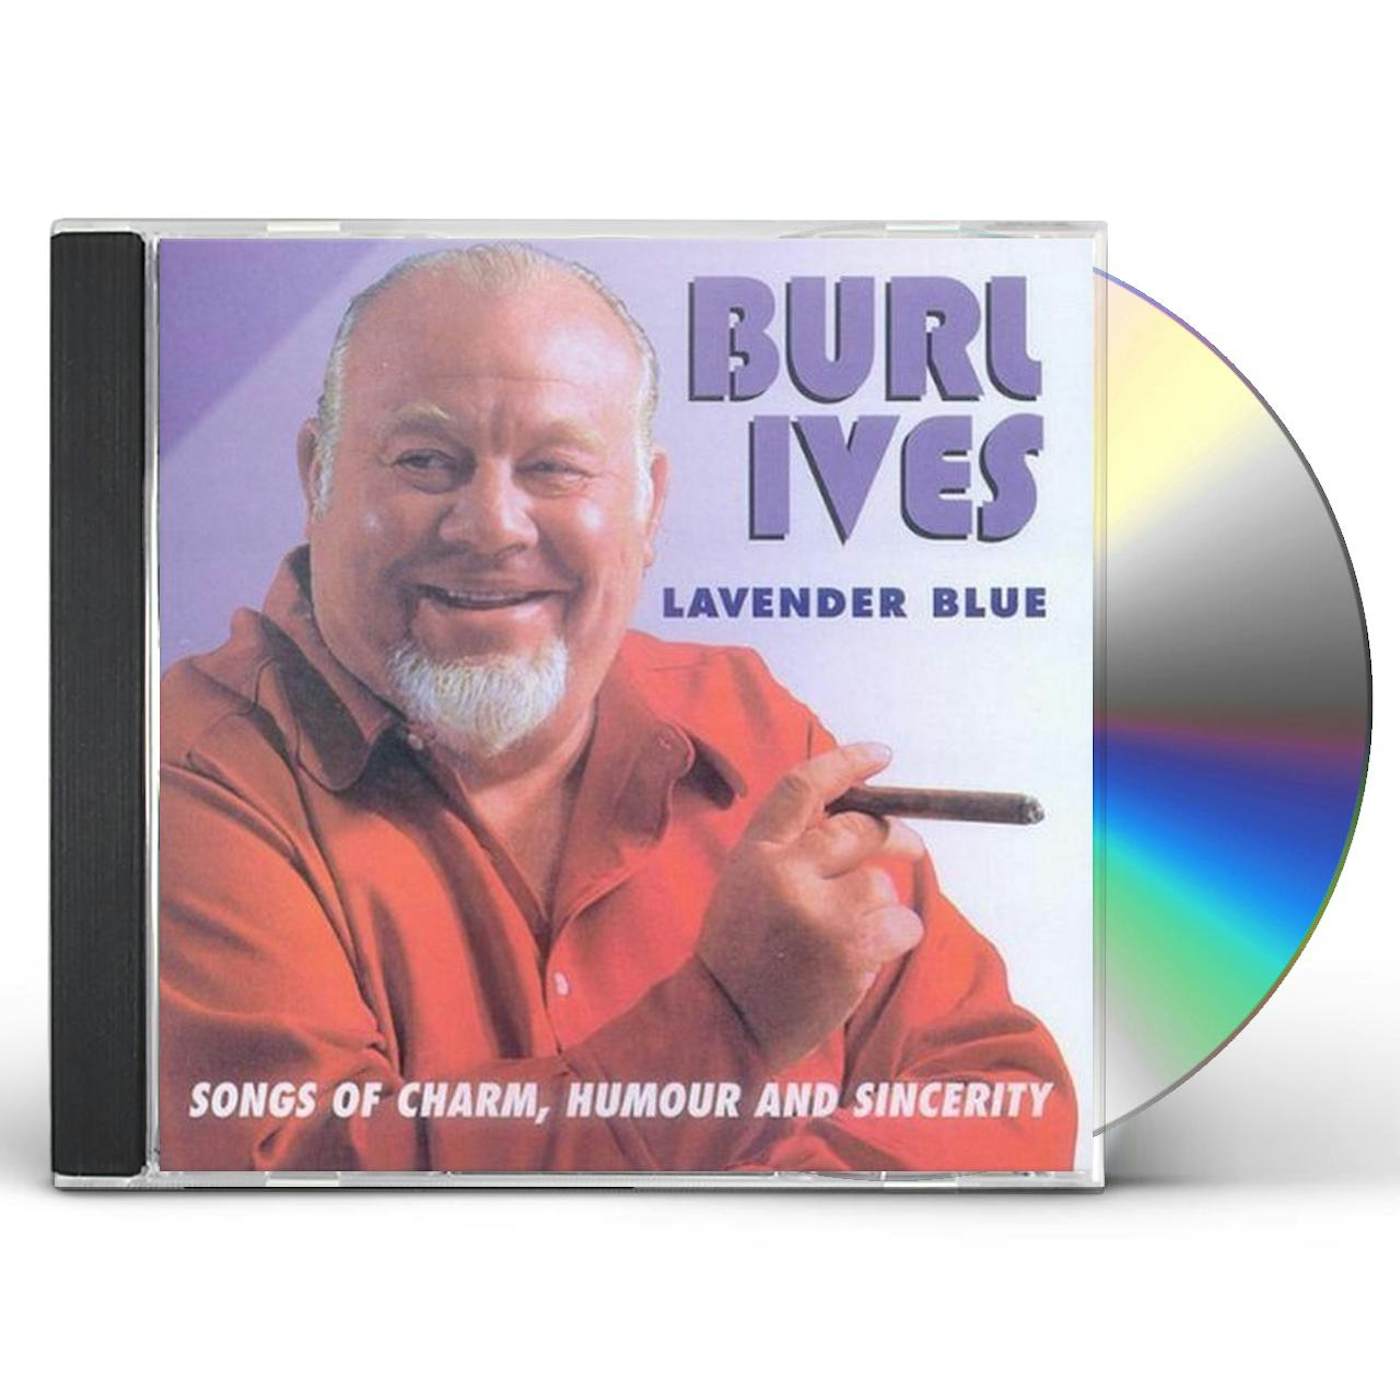 Burl Ives LAVENDER BLUE: SONGS OF CHARM HUMOUR & SINCERITY CD